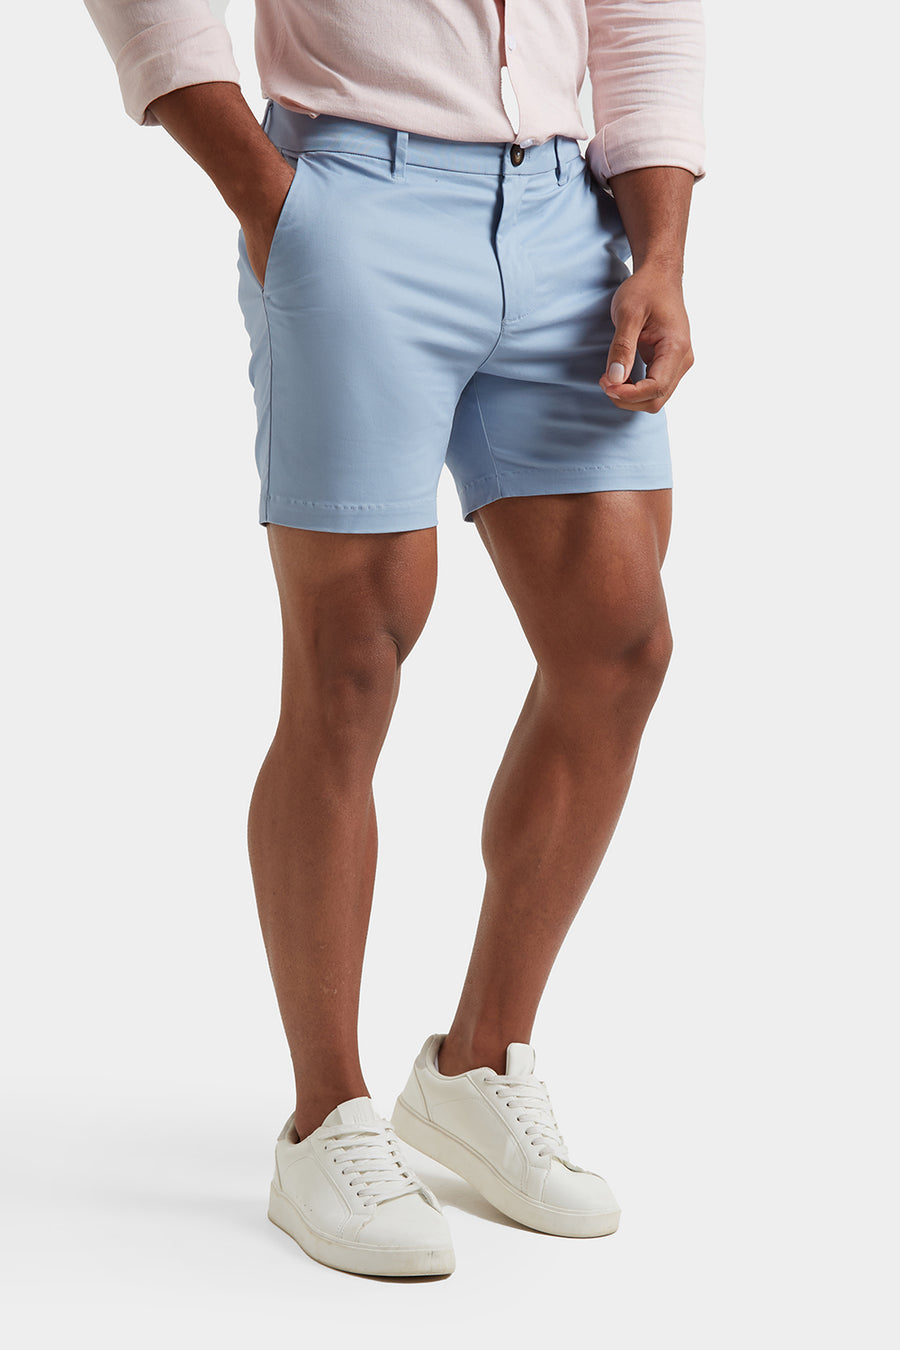 Athletic Fit Chino Shorts 5" in Soft Blue - TAILORED ATHLETE - USA